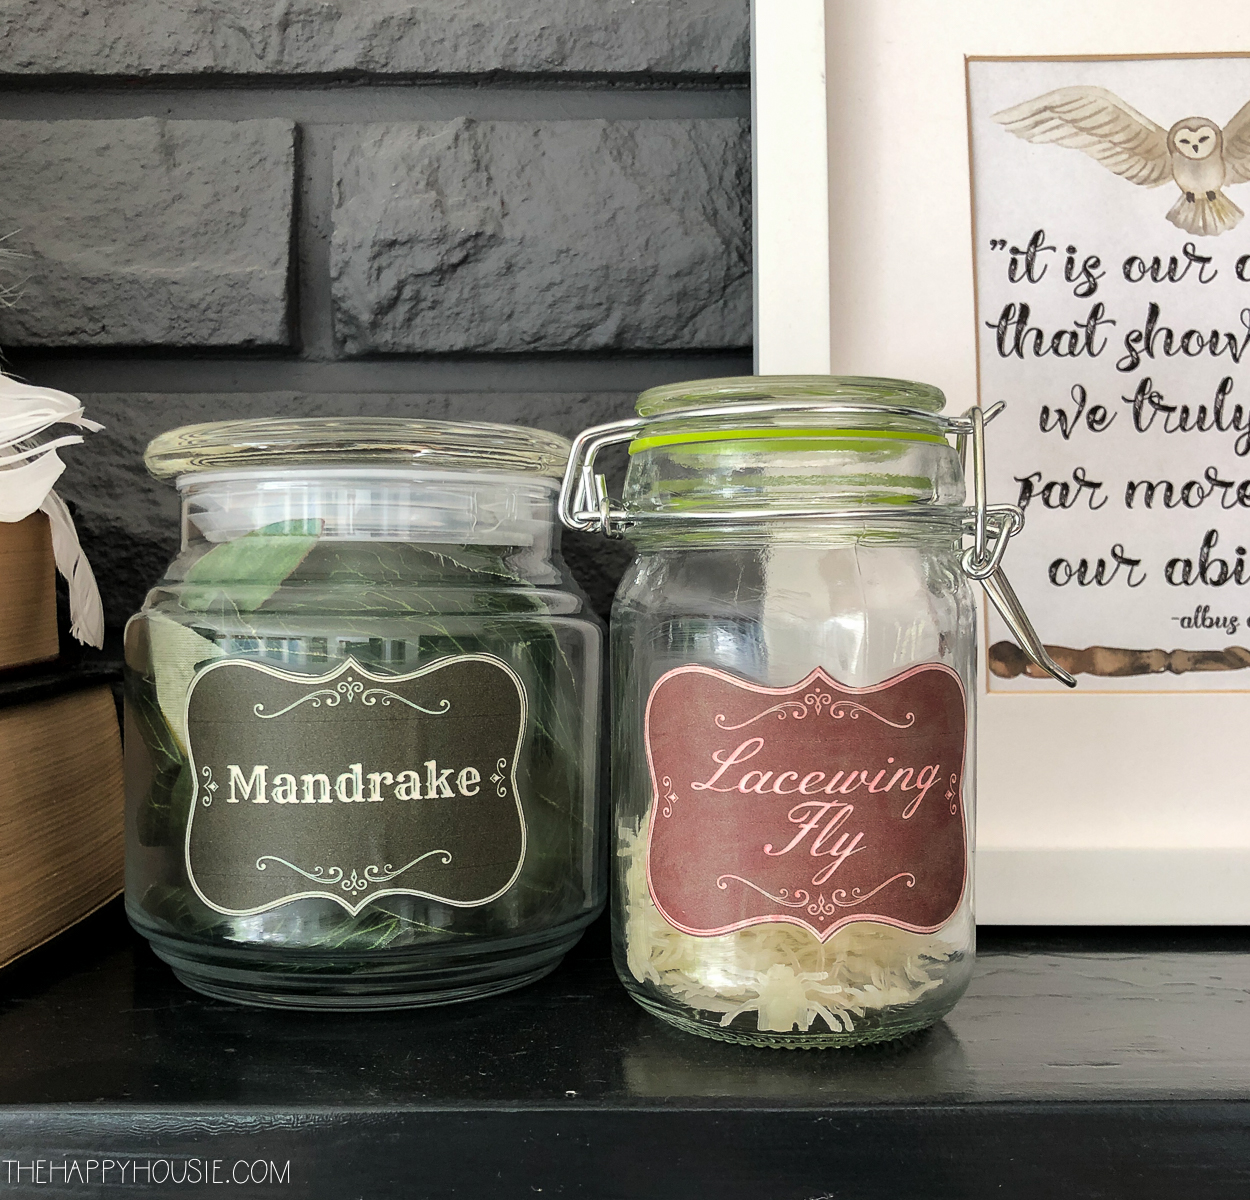 Jars are on the mantel that are lacewing fly and Mandrake.